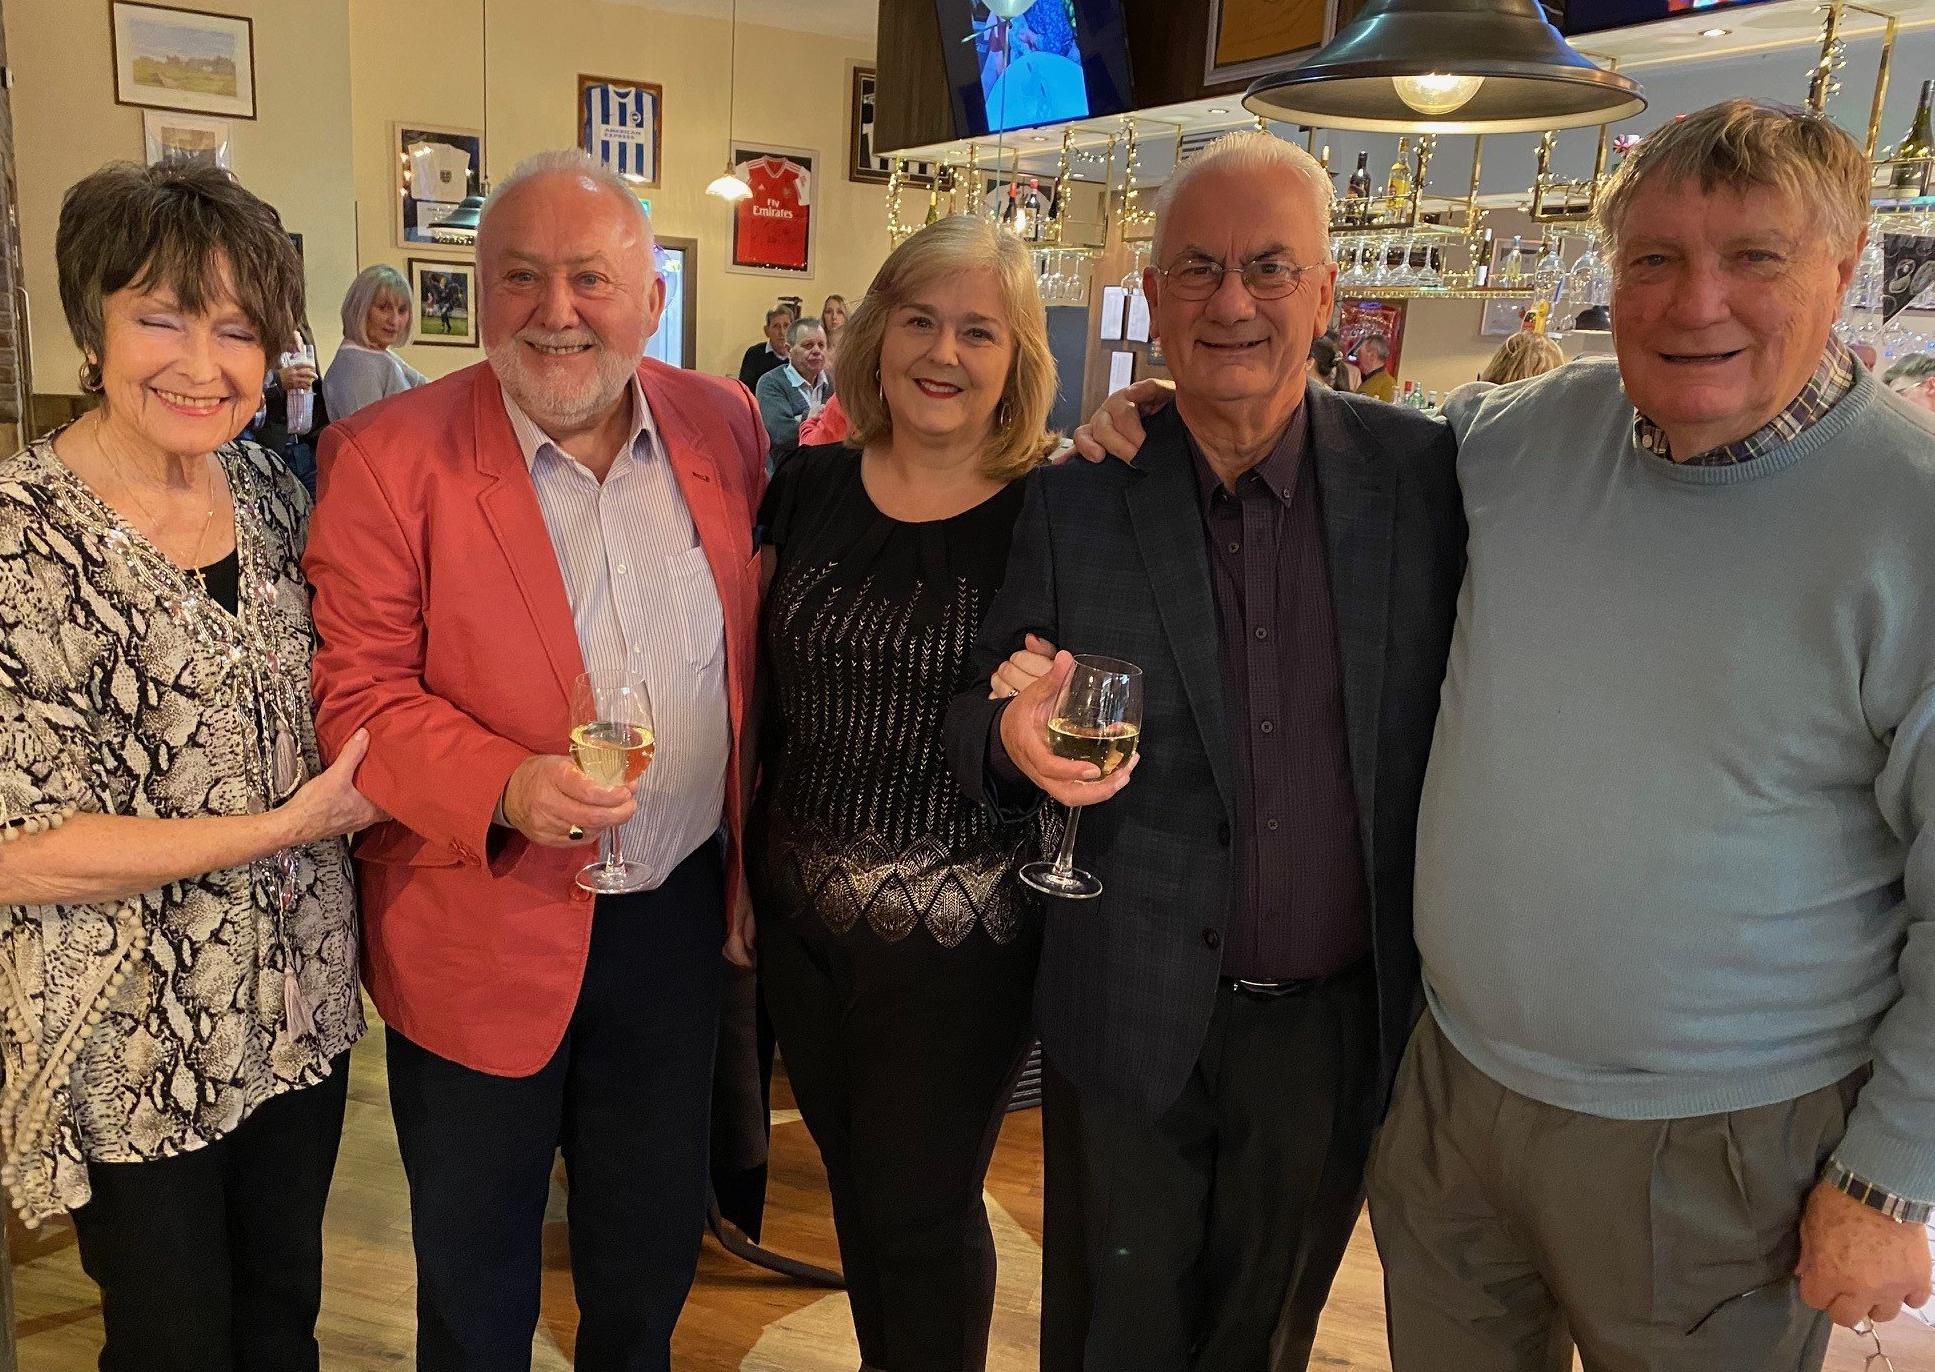 Eastbourne restaurant owner Colin Taylor celebrates his 80th birthday at Taylor's Sports Bar in the Beacon Centre. SUS-200219-140920001